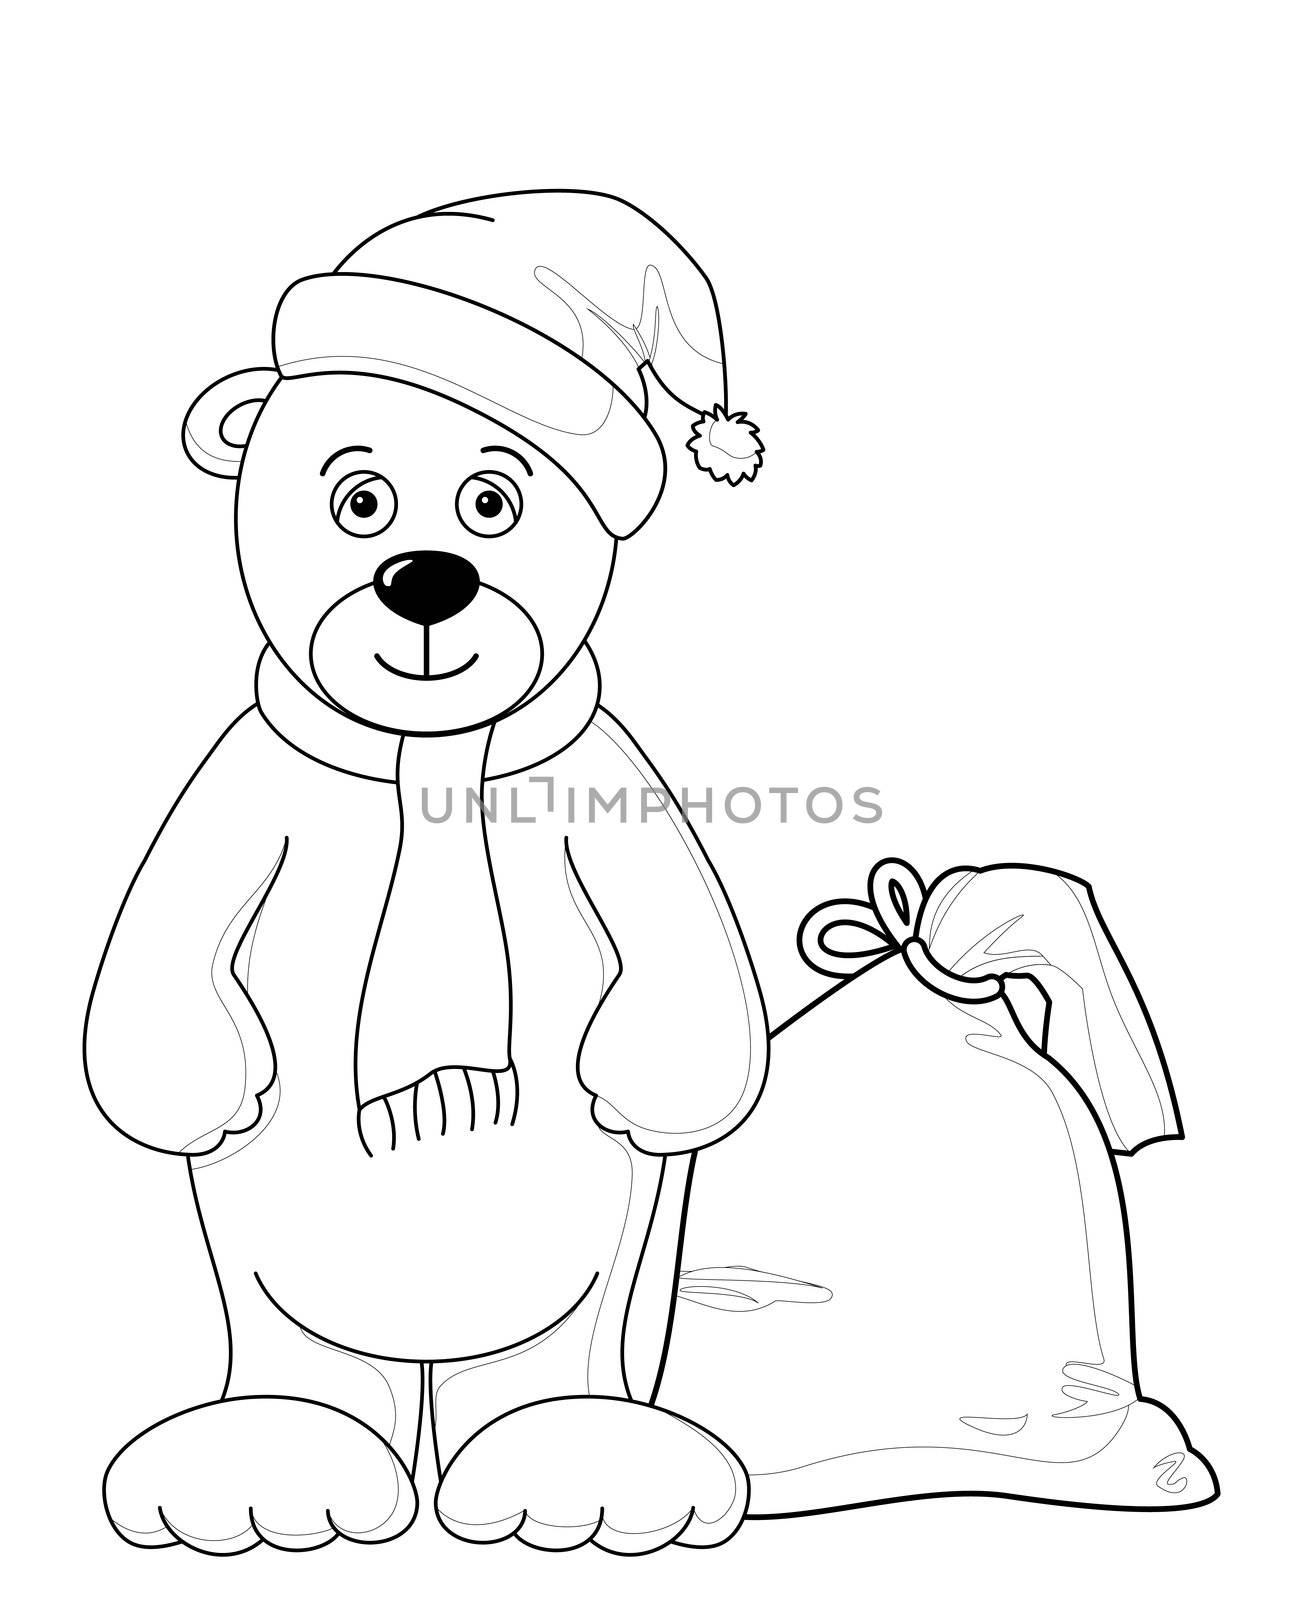 Teddy bear Santa Claus with a bag of Christmas gifts, contours